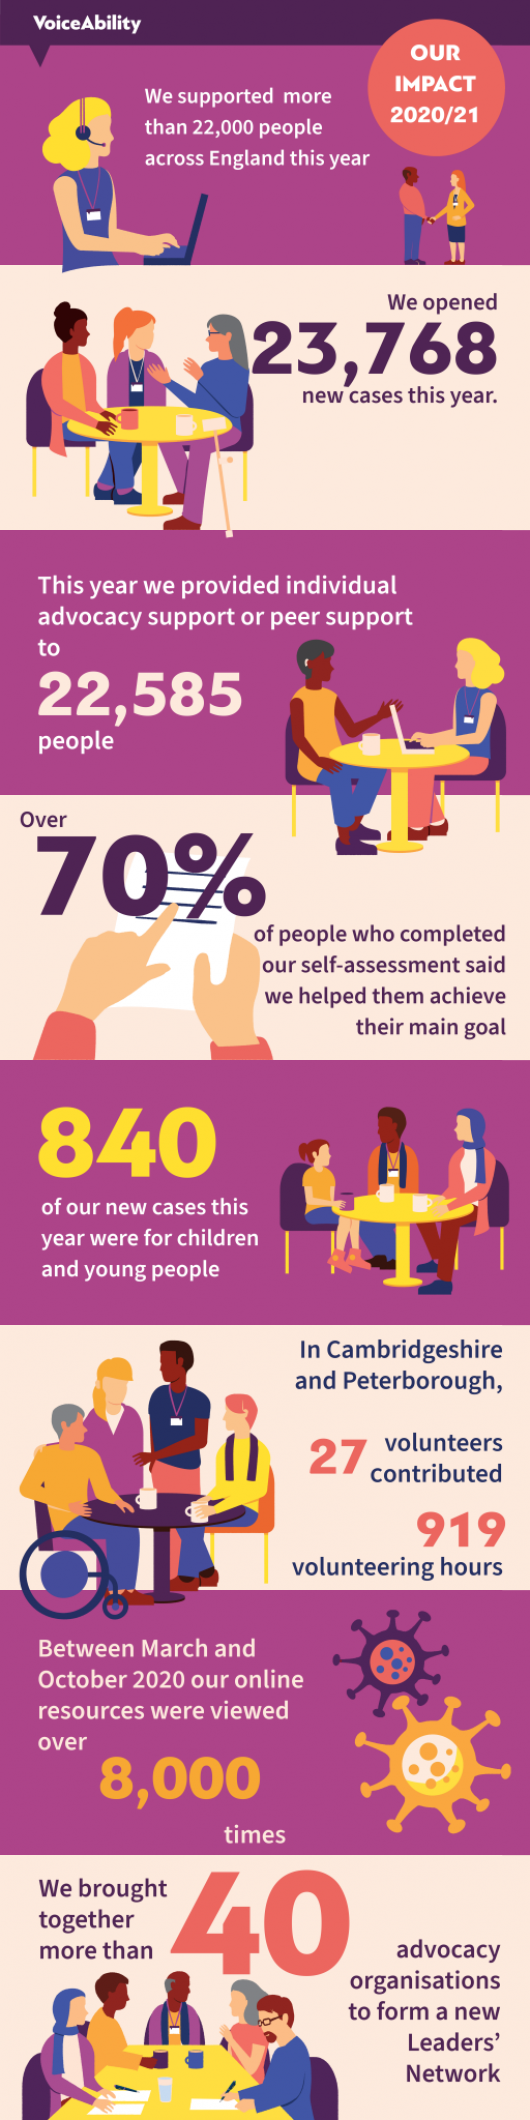 Our impact 2020/21   We supported more than 22,000 people across England this year   We opened 23,765 new cases this year    This year we provided individual advocacy support or peer support to 22,585 people   Over 70% of people who completed our self-assessment said we helped them achieve their main goal   840 of our new cases this year were for children and young people    In Cambridgeshire and Peterborough, 27 volunteers contributed 919 volunteering hours    Between March and October 2020 our online resources were viewed over 8,000 times   We brought together more than 40 advocacy organisations to form a new Leaders’ Network